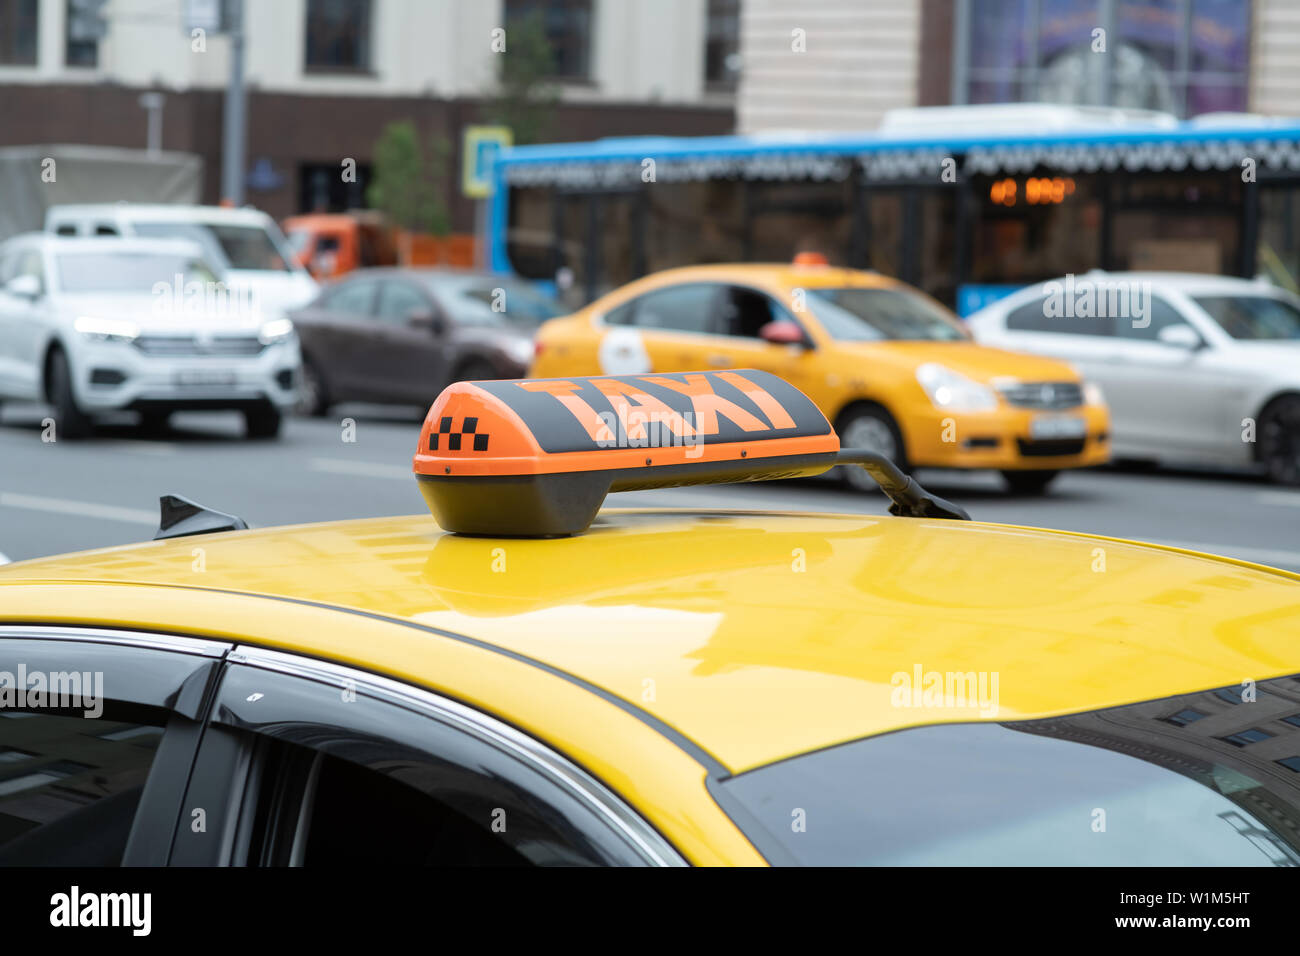 description: Yellow cab with taxi sign on the roof parked on the city street waiting for passengers to pick up.The taxi is parked on the street of the Stock Photo